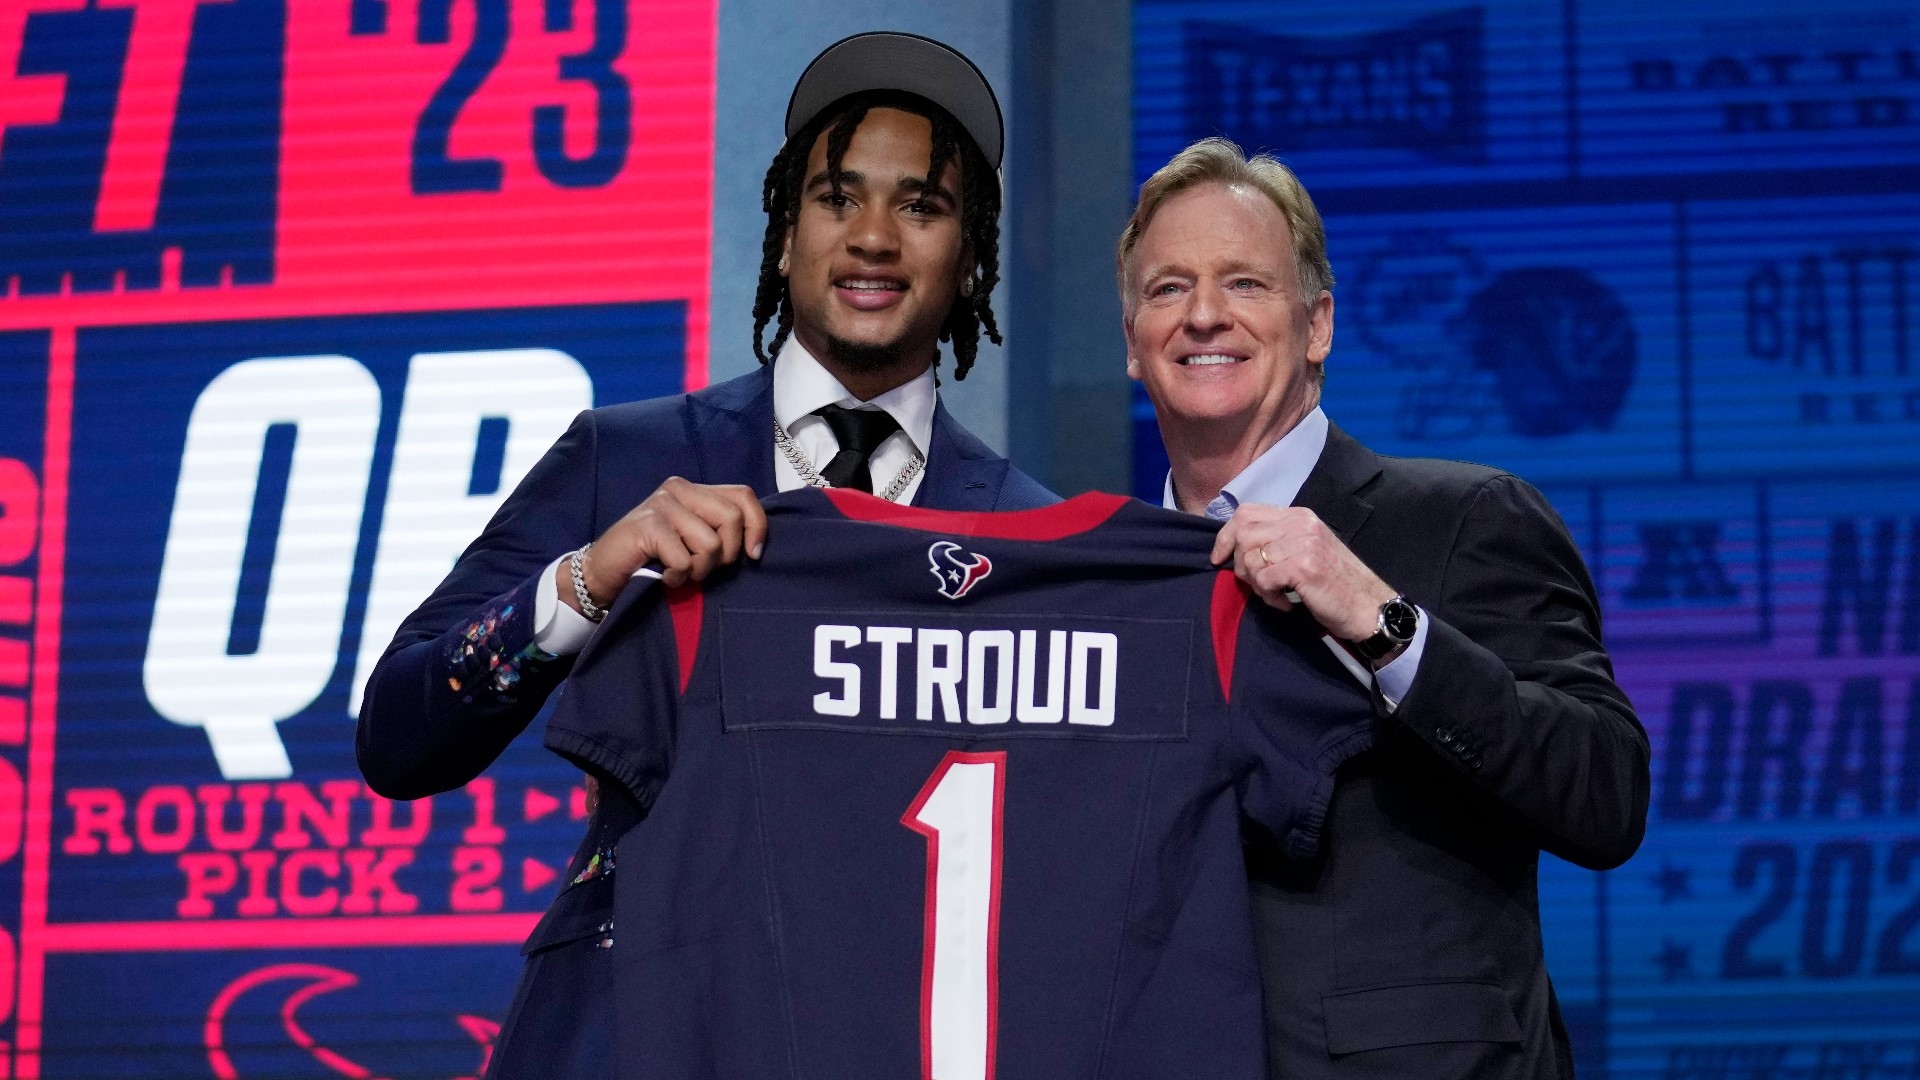 C.J. Stroud with drafted with the second overall